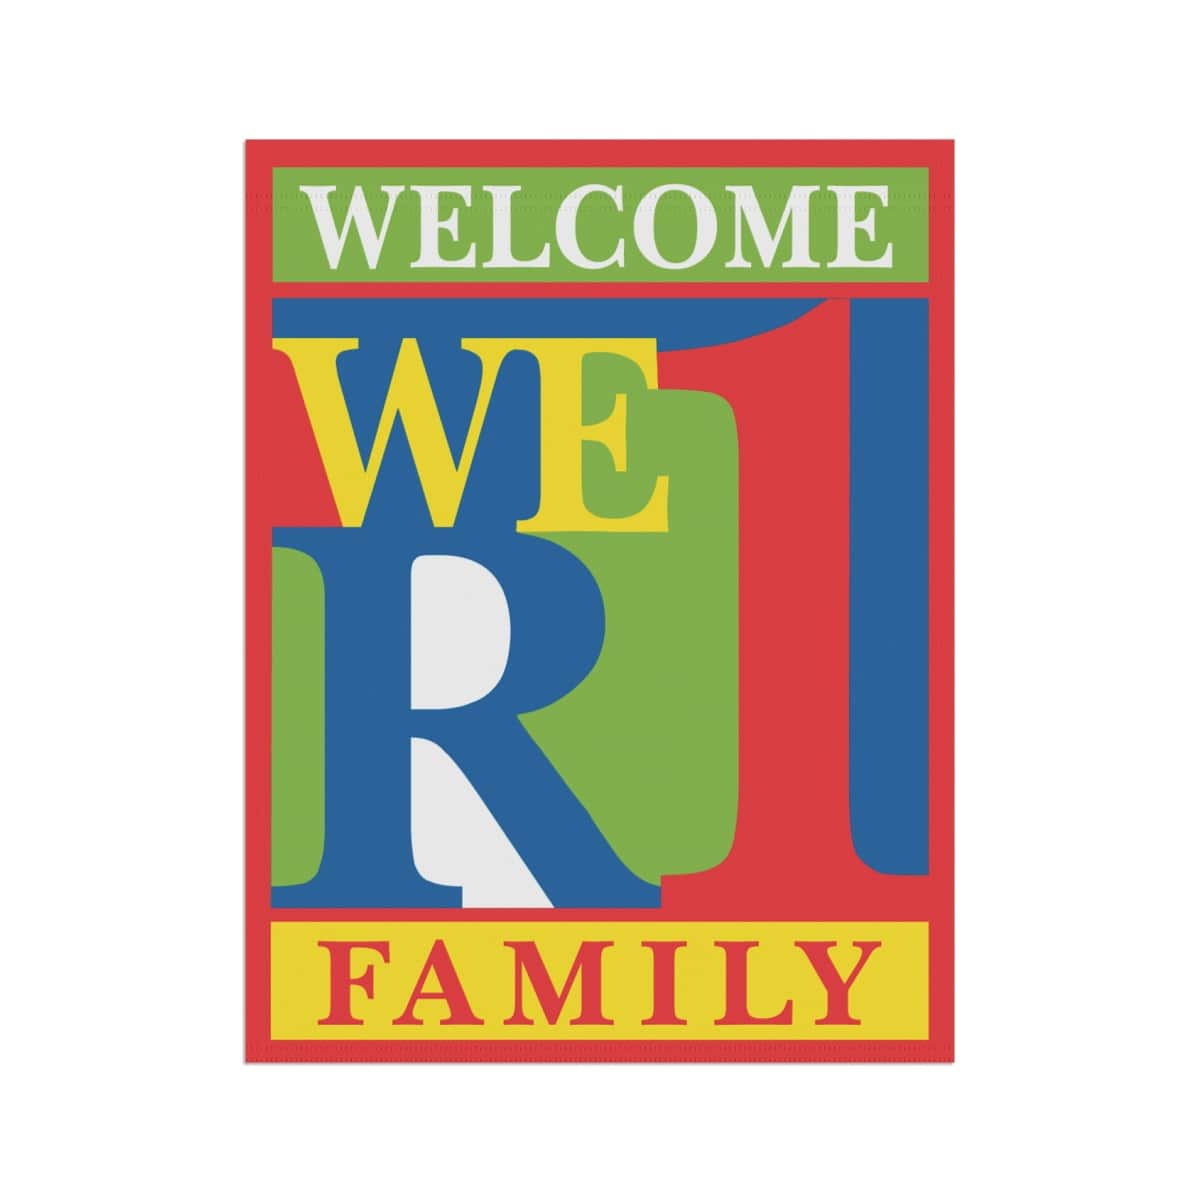 WeR1 (We Are One) Family Garden & House Banner - Interfaith Resources